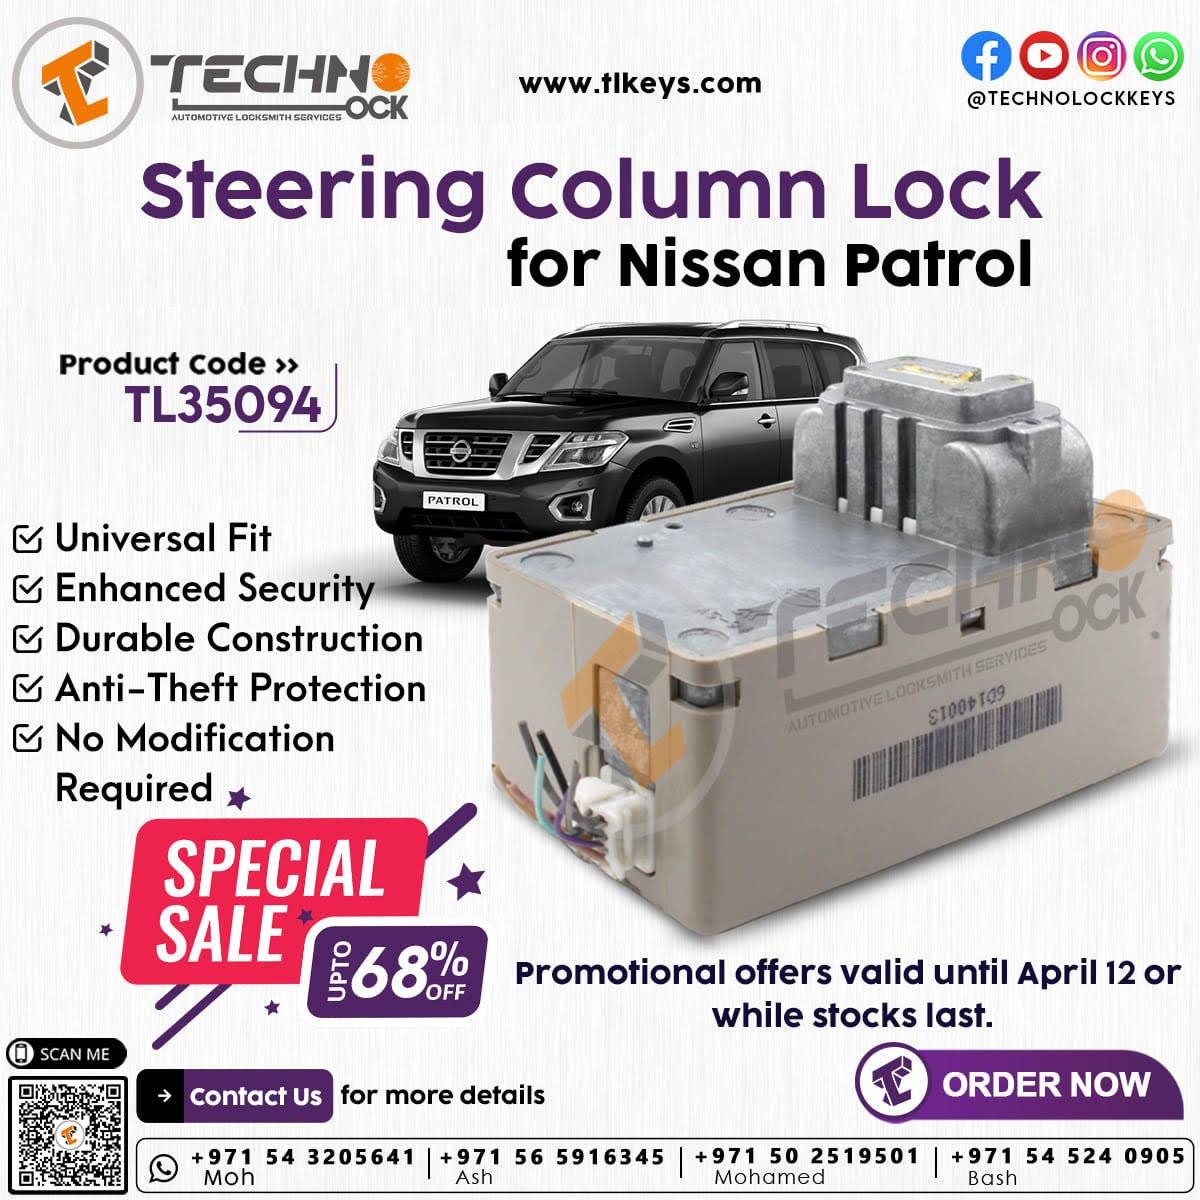 Protect Your Nissan Patrol: A Detailed Overview of the 60140013 Steering Column Lock